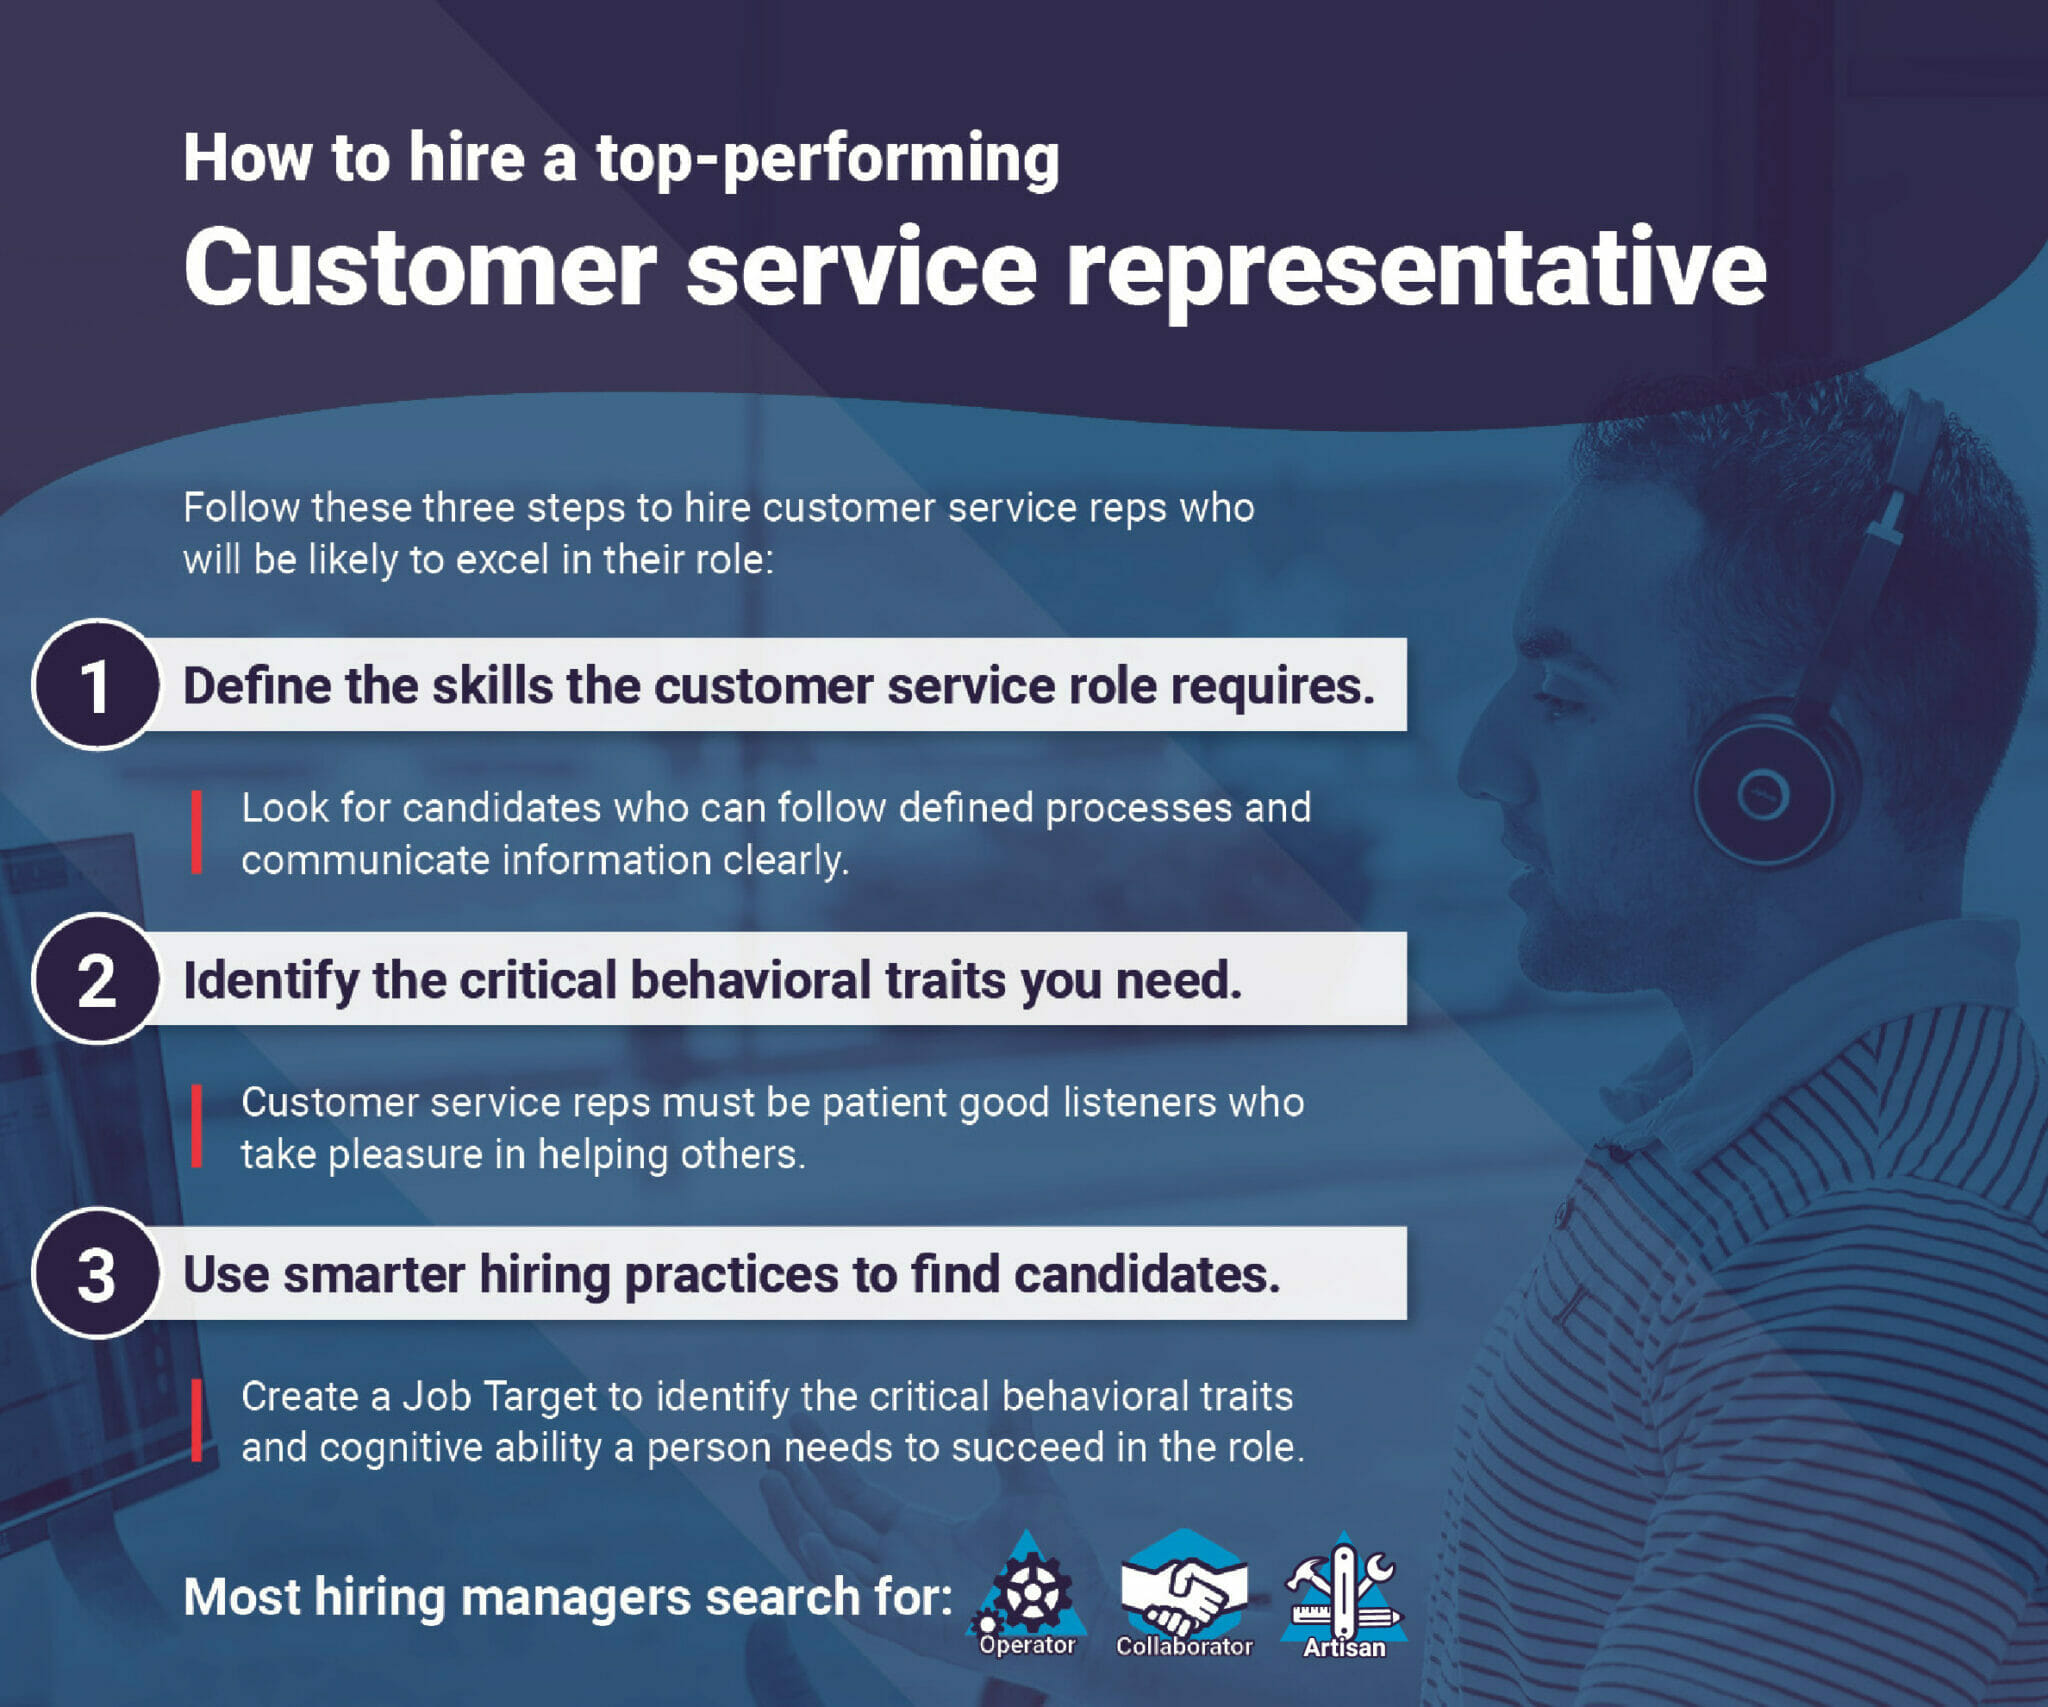 Need to find customer service reps? Follow these guidelines.